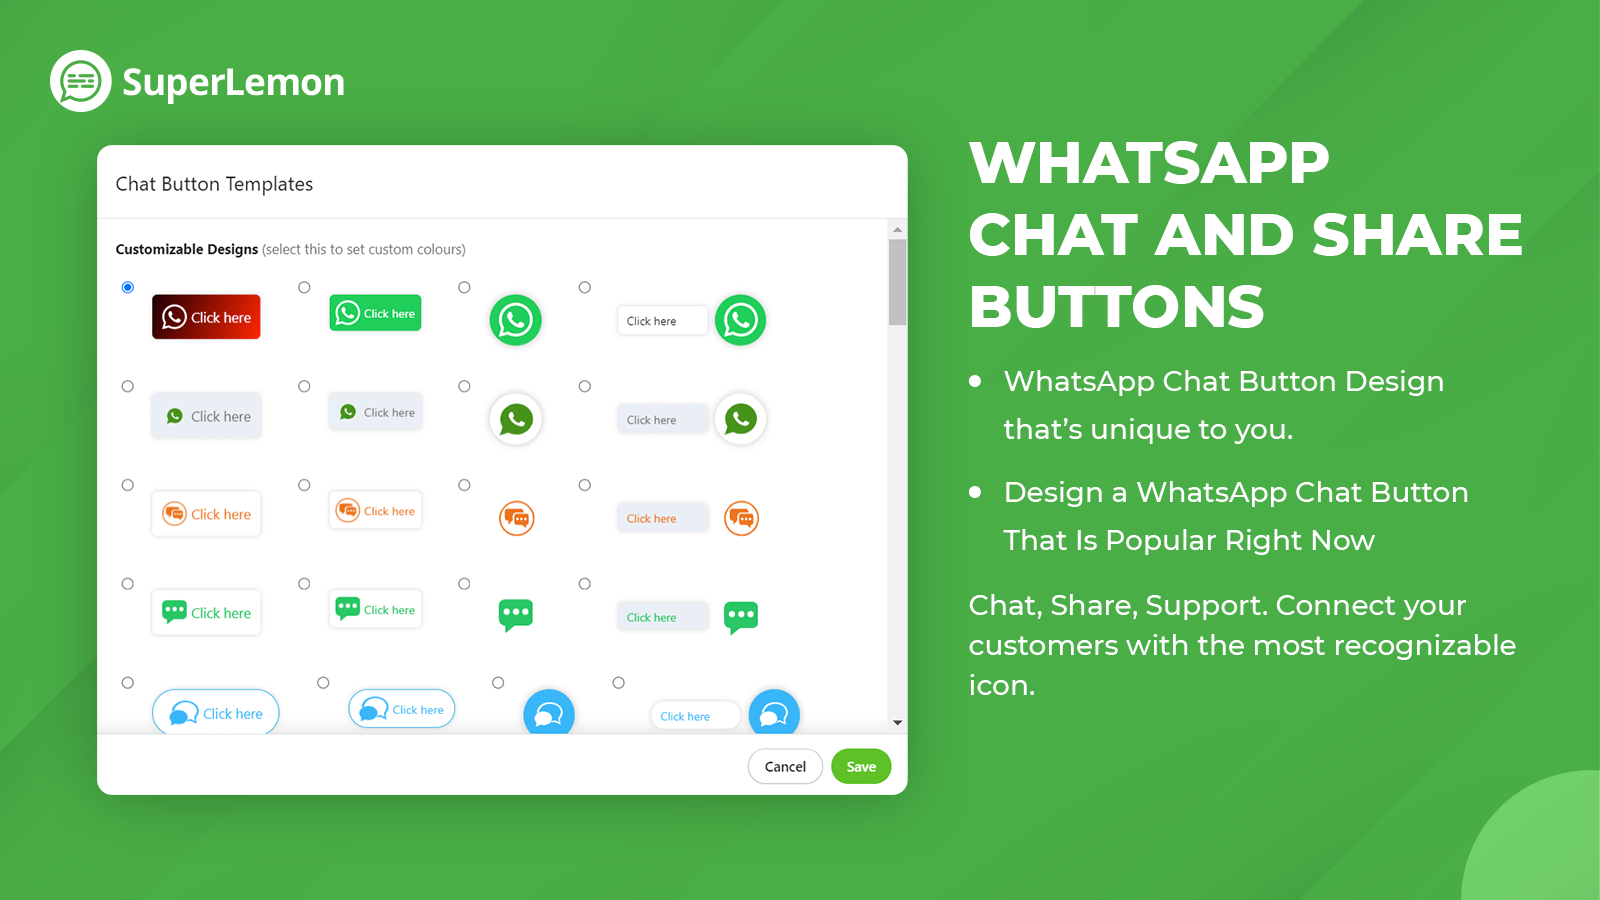 Whatsapp Chat and Share Buttons